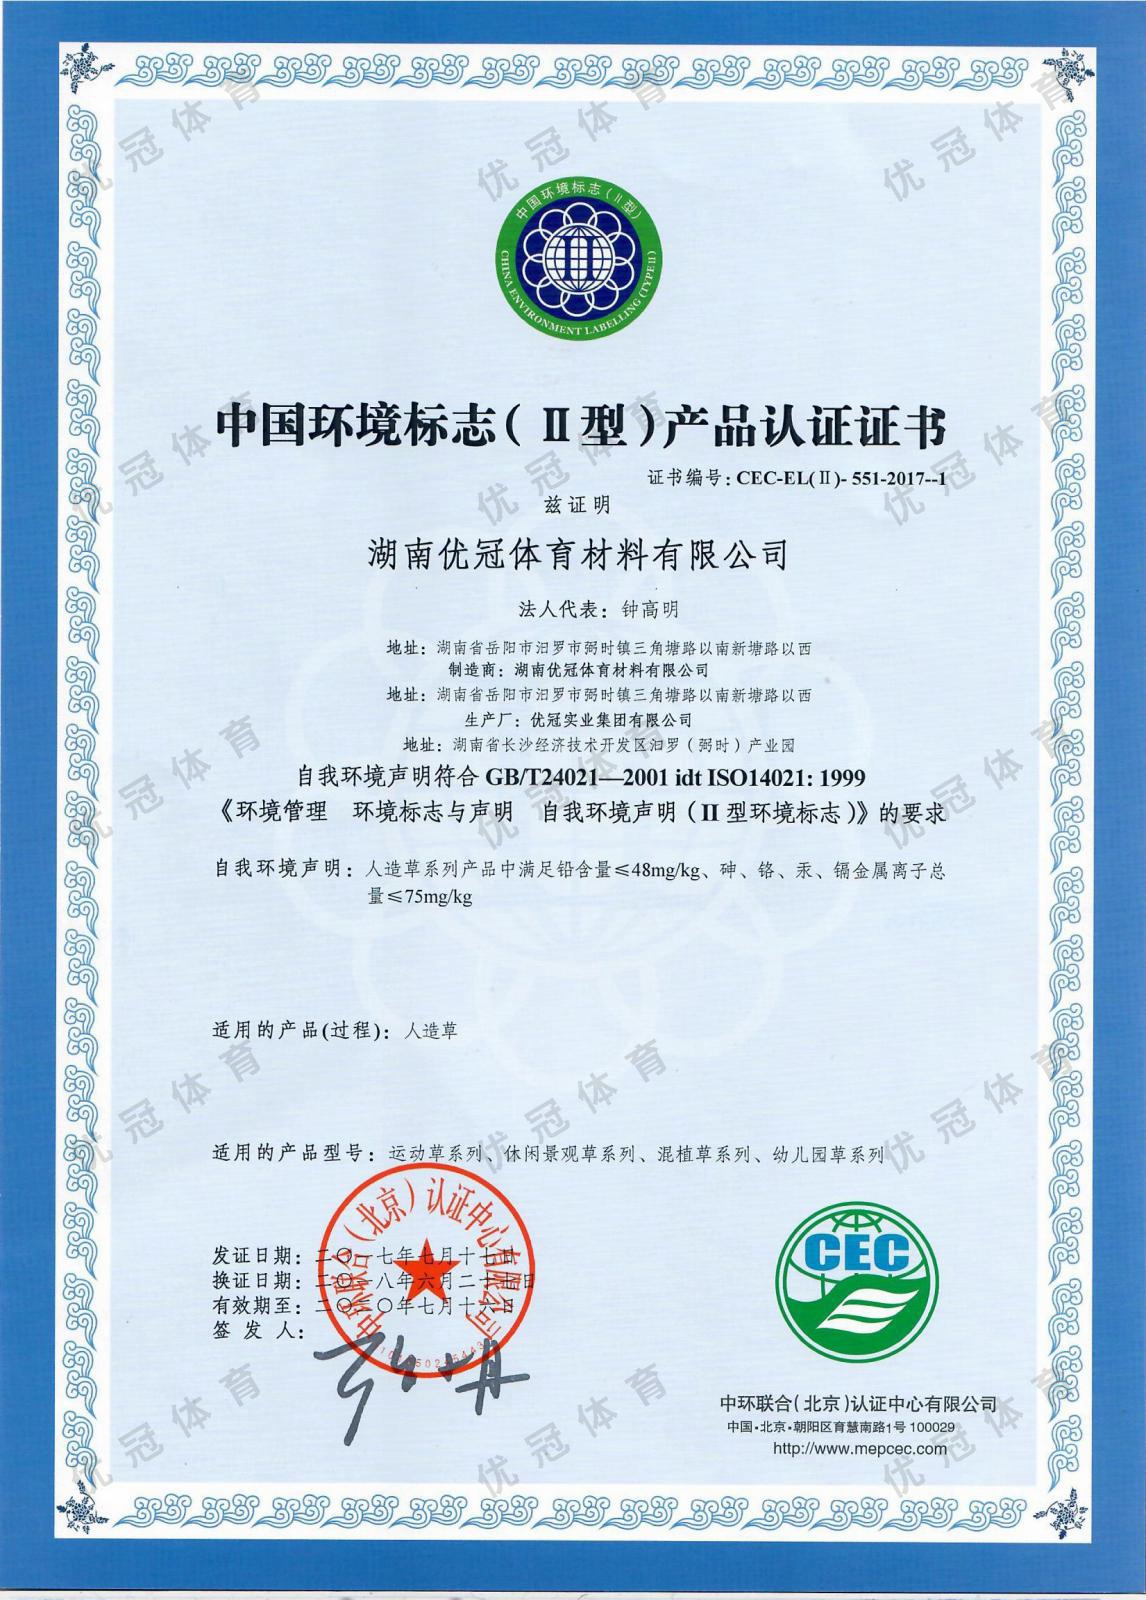 China Environmental Label for Artificial Turf